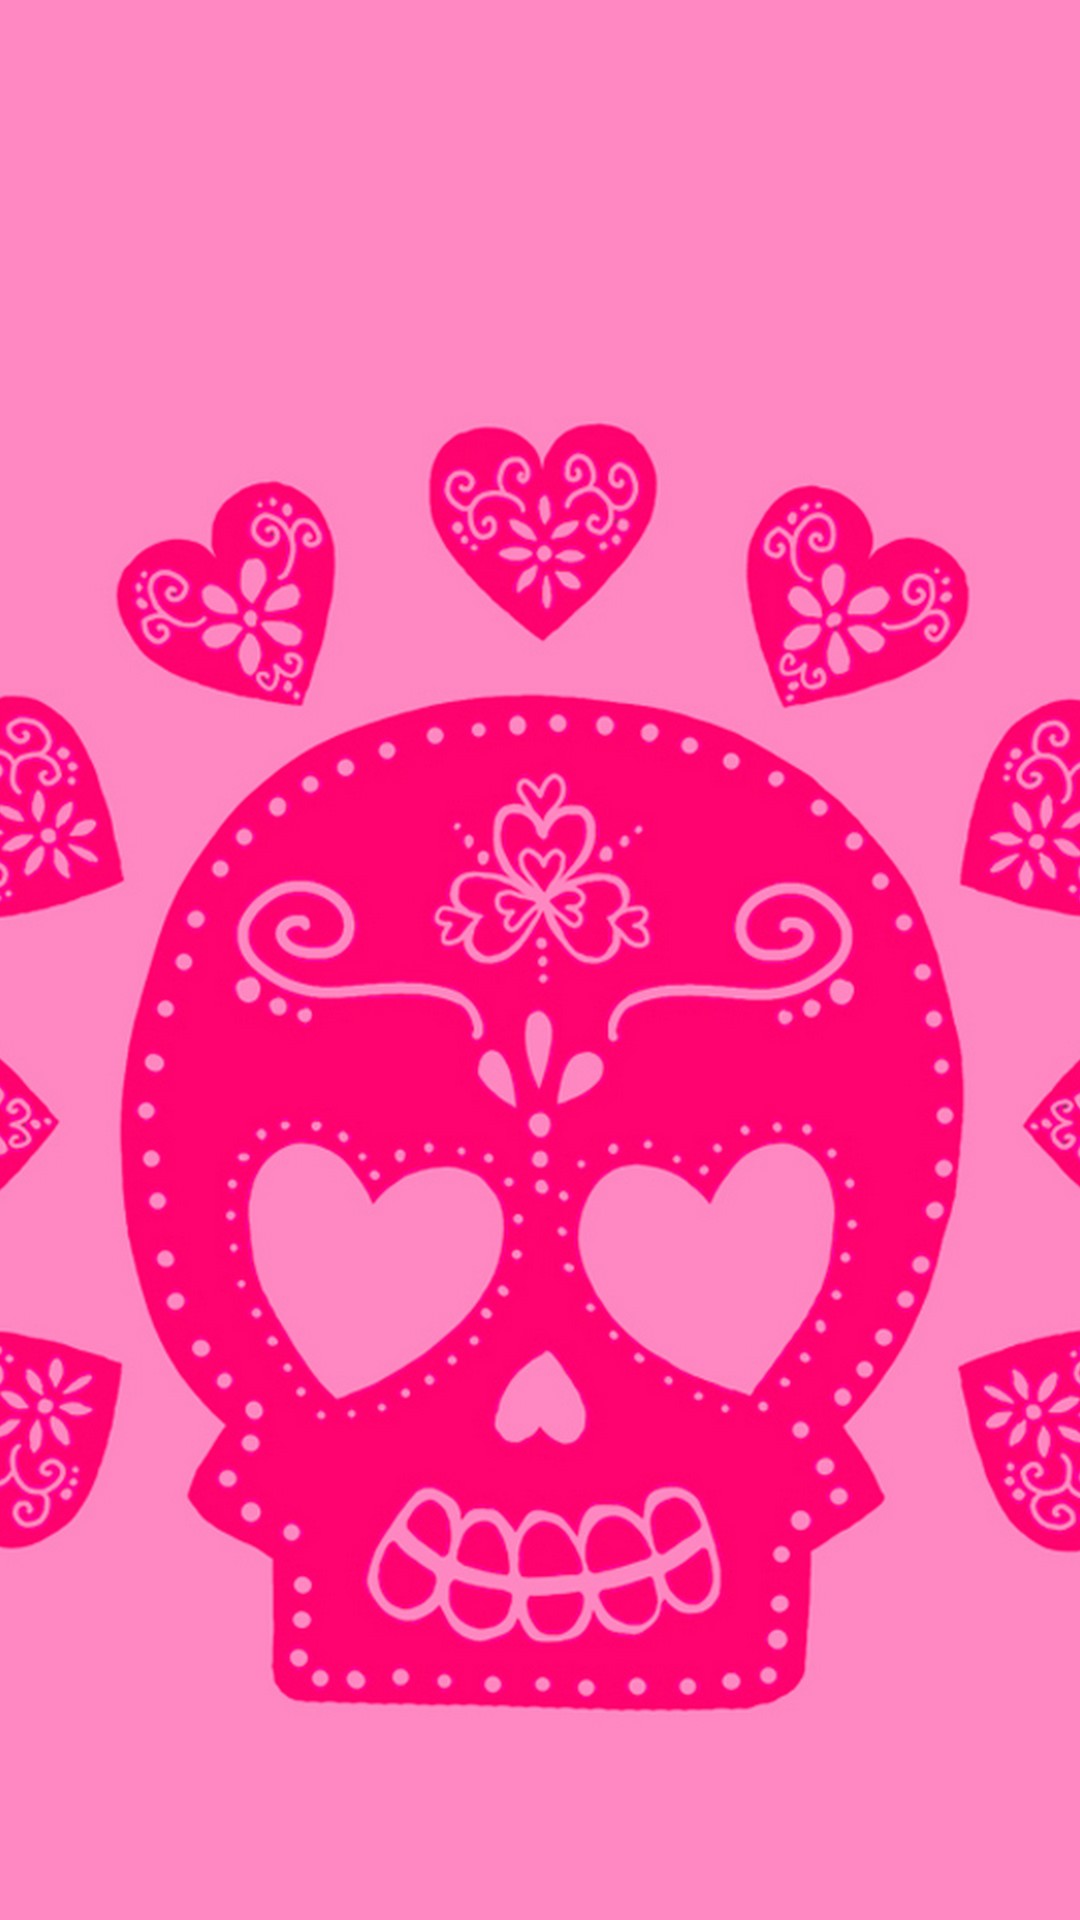 Download Skull Cute Girly Wallpaper Android - HD ...